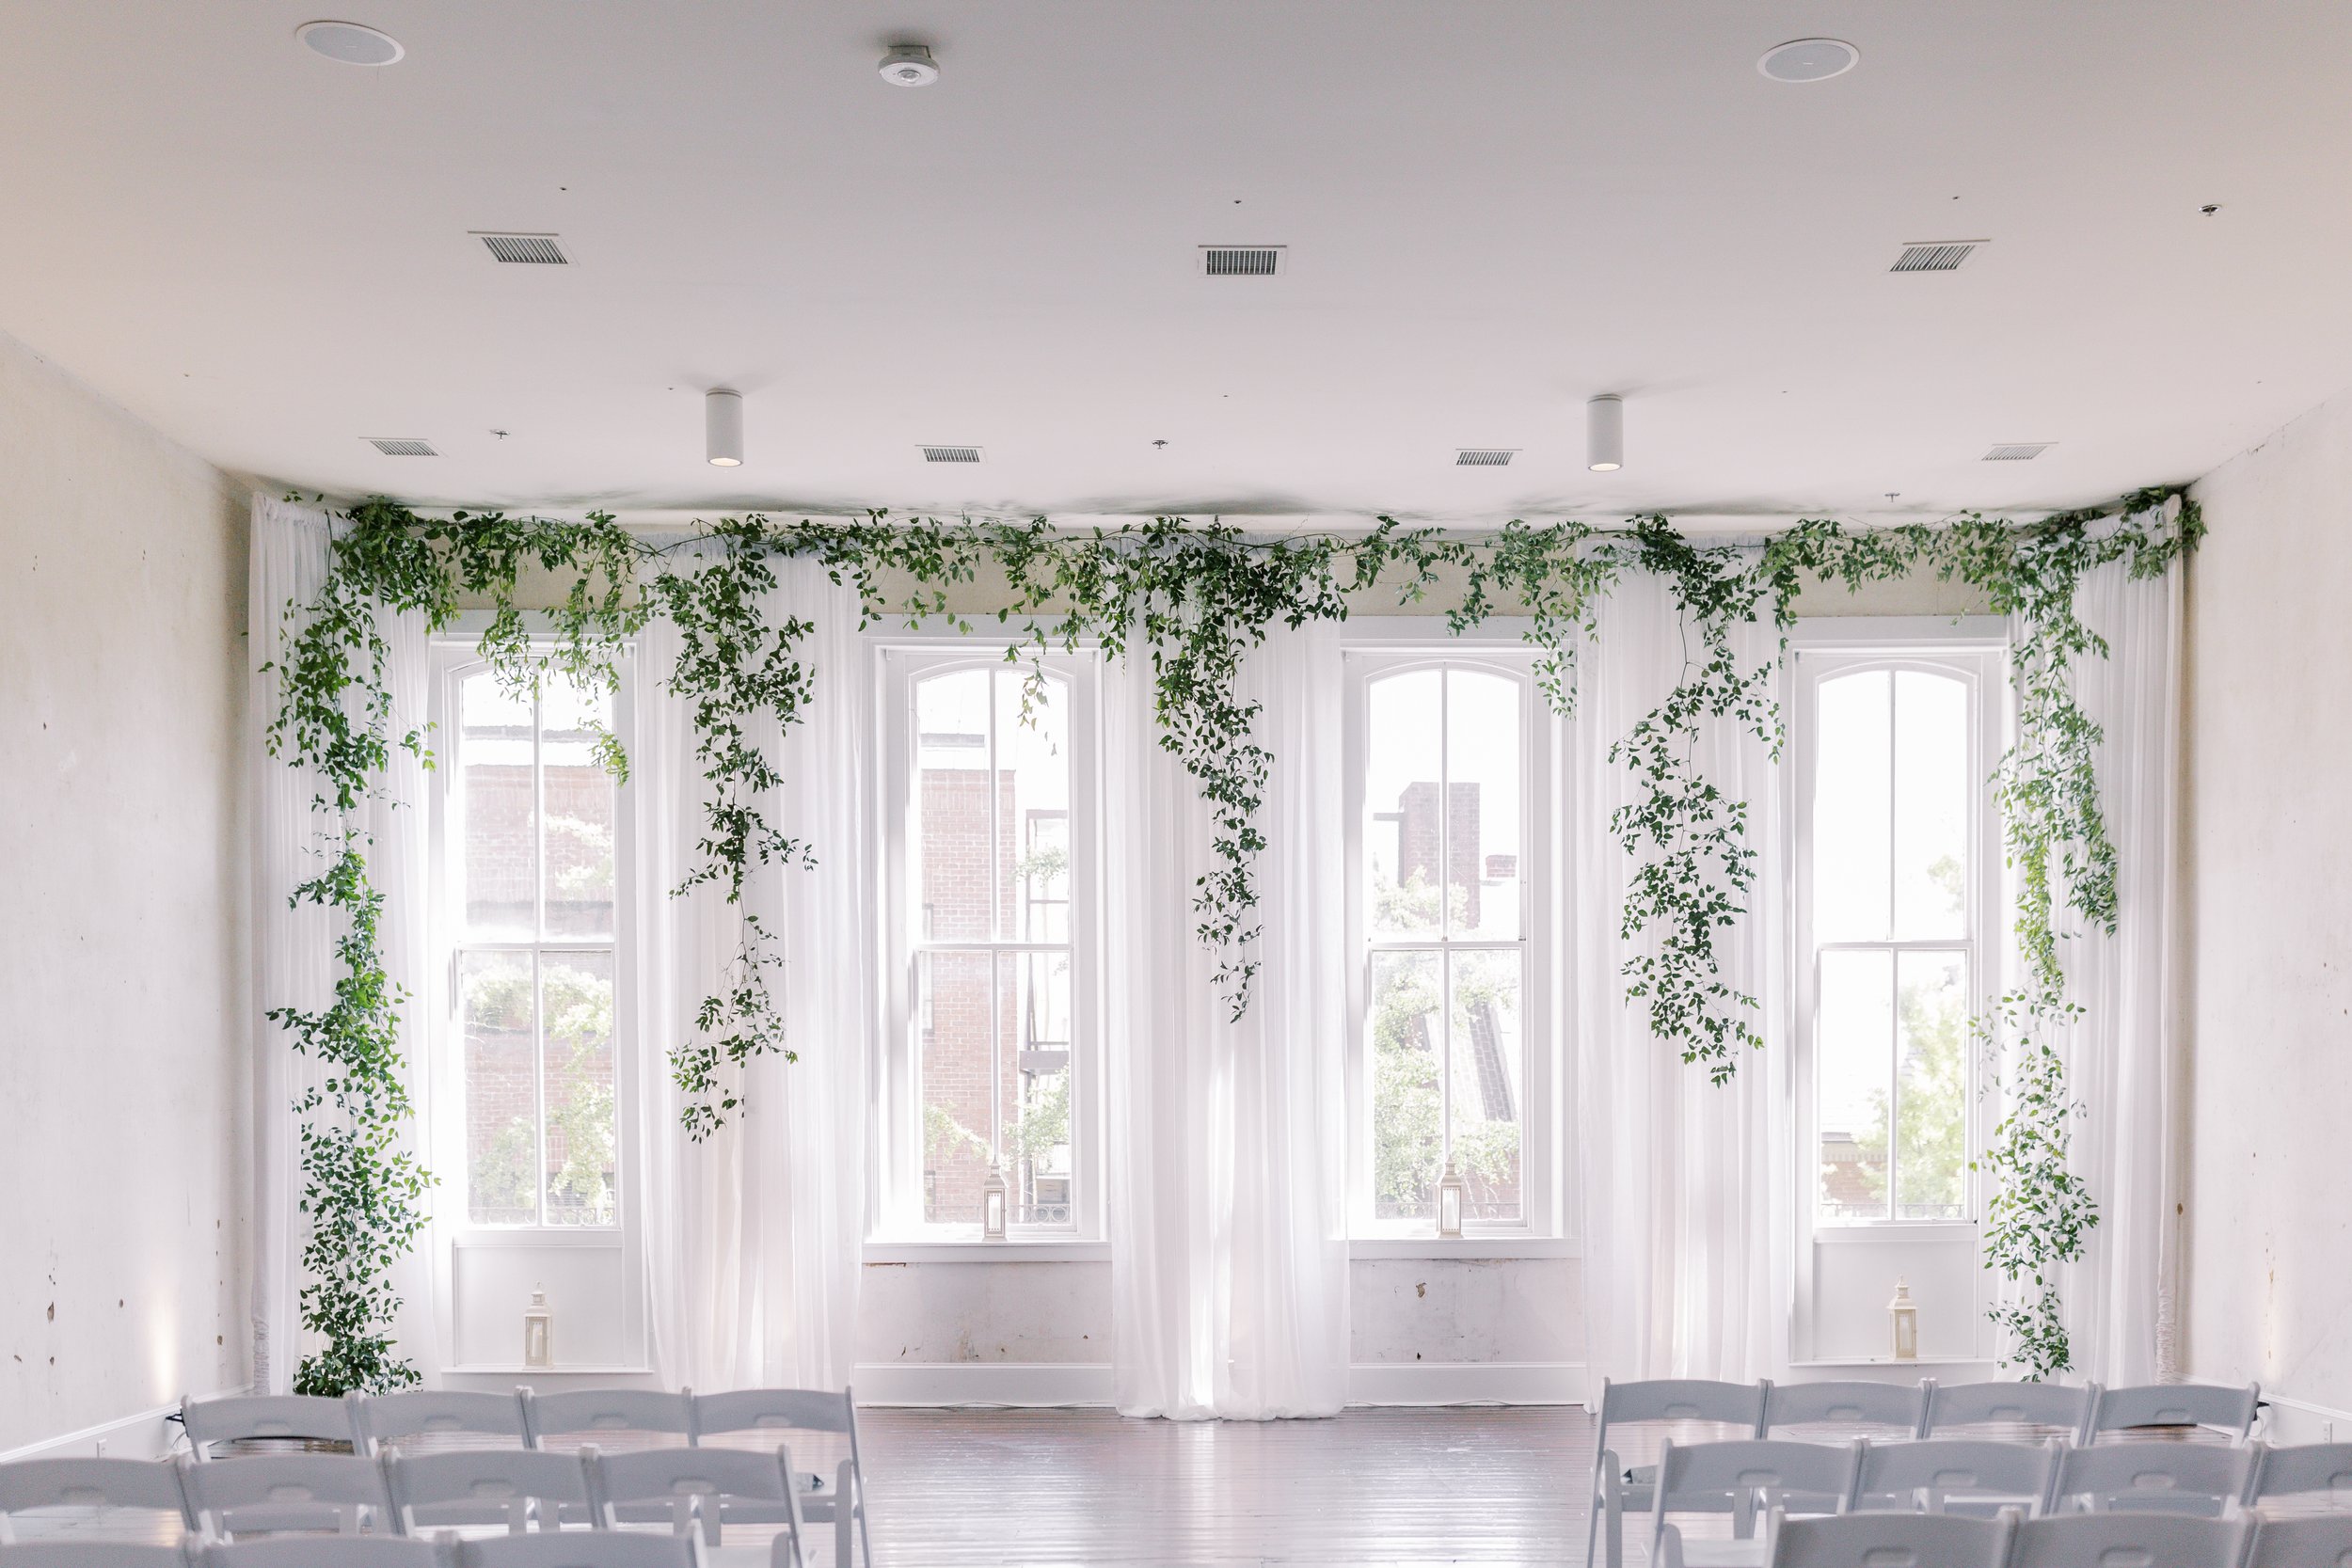 Greenery and white themed ceremony space